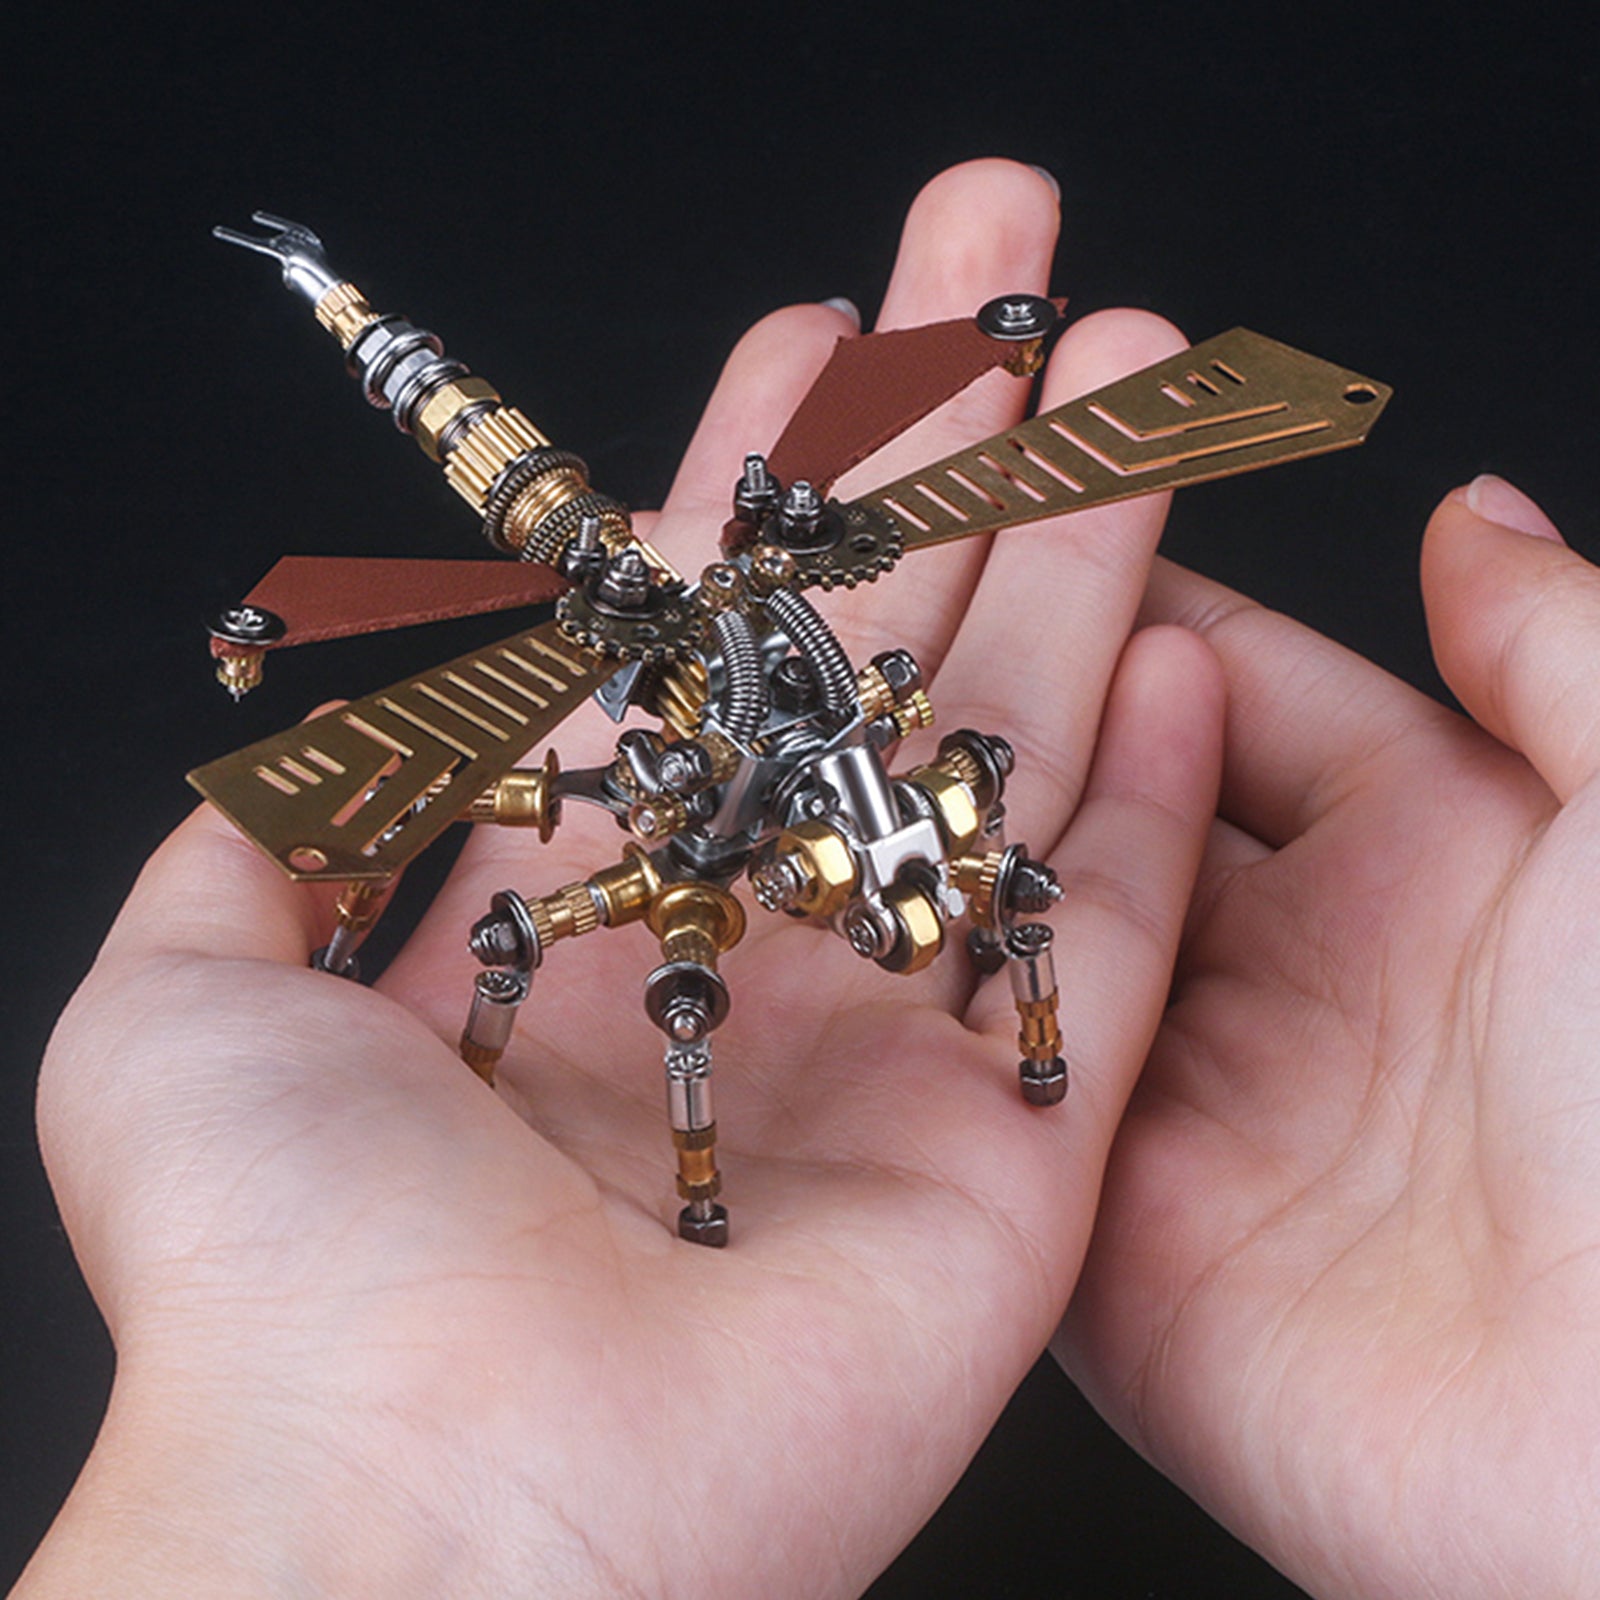 Steampunk Metal Fire Fly Insect Bugs Puzzle DIY Model Kit with Display Base